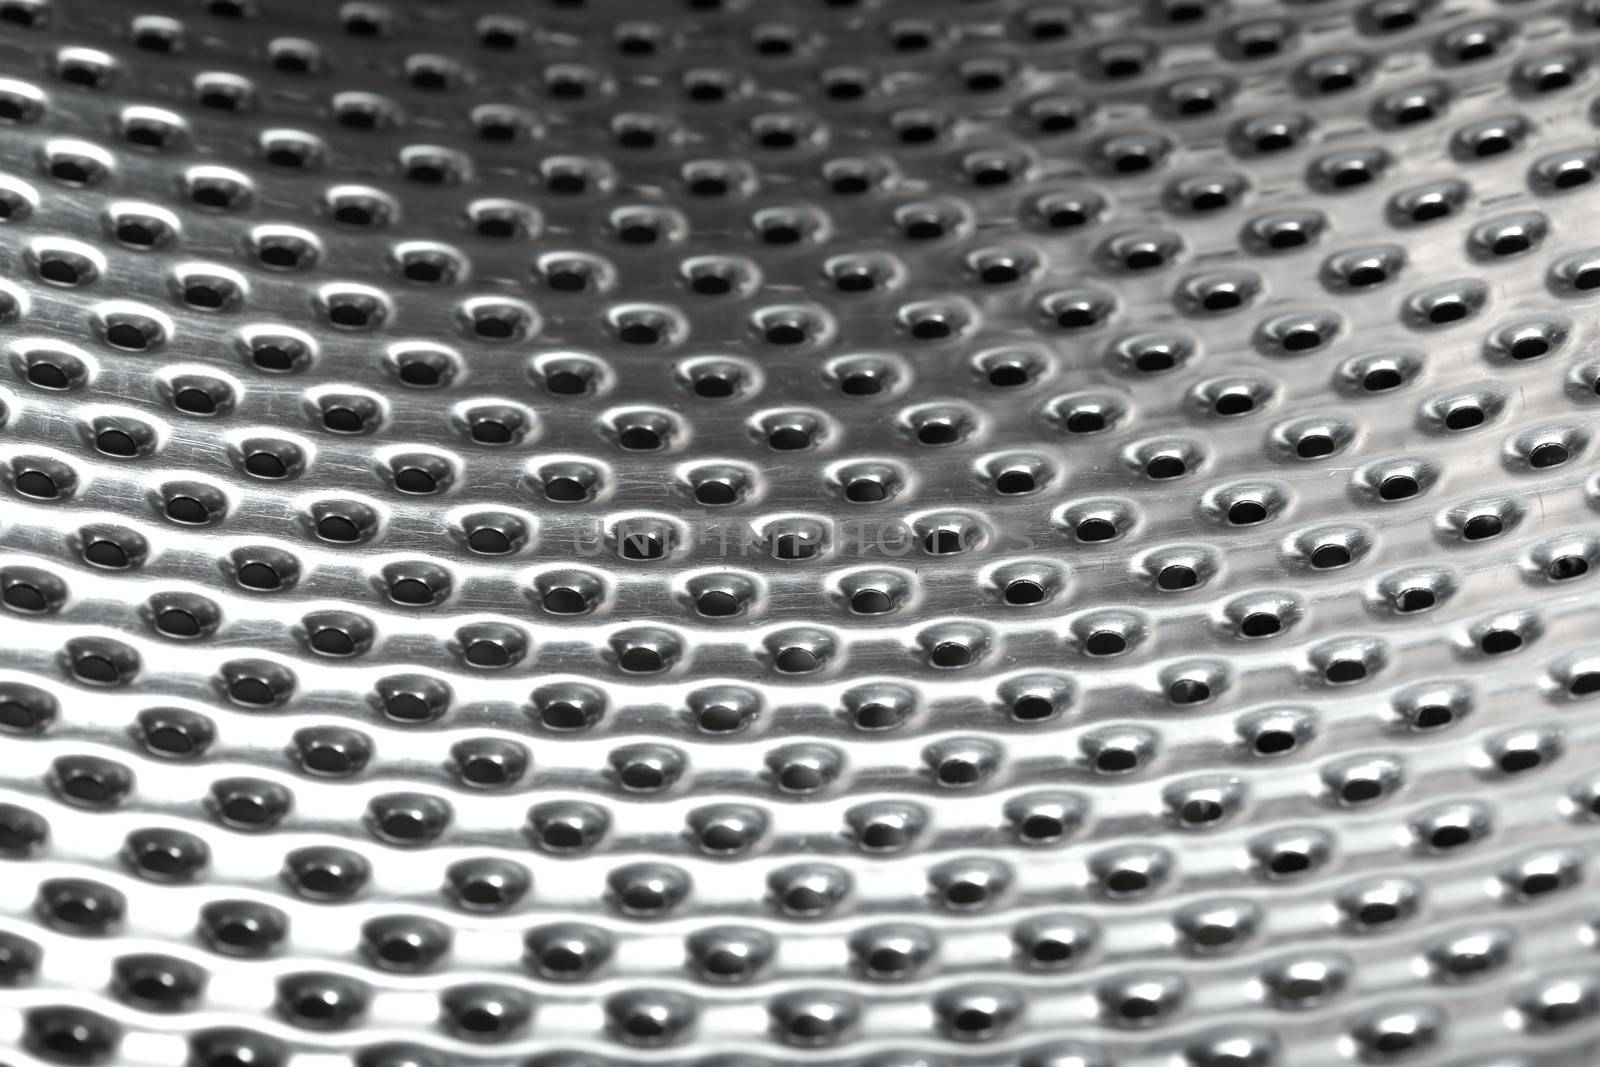 Close-up photo of the metal pattern with perforated holes